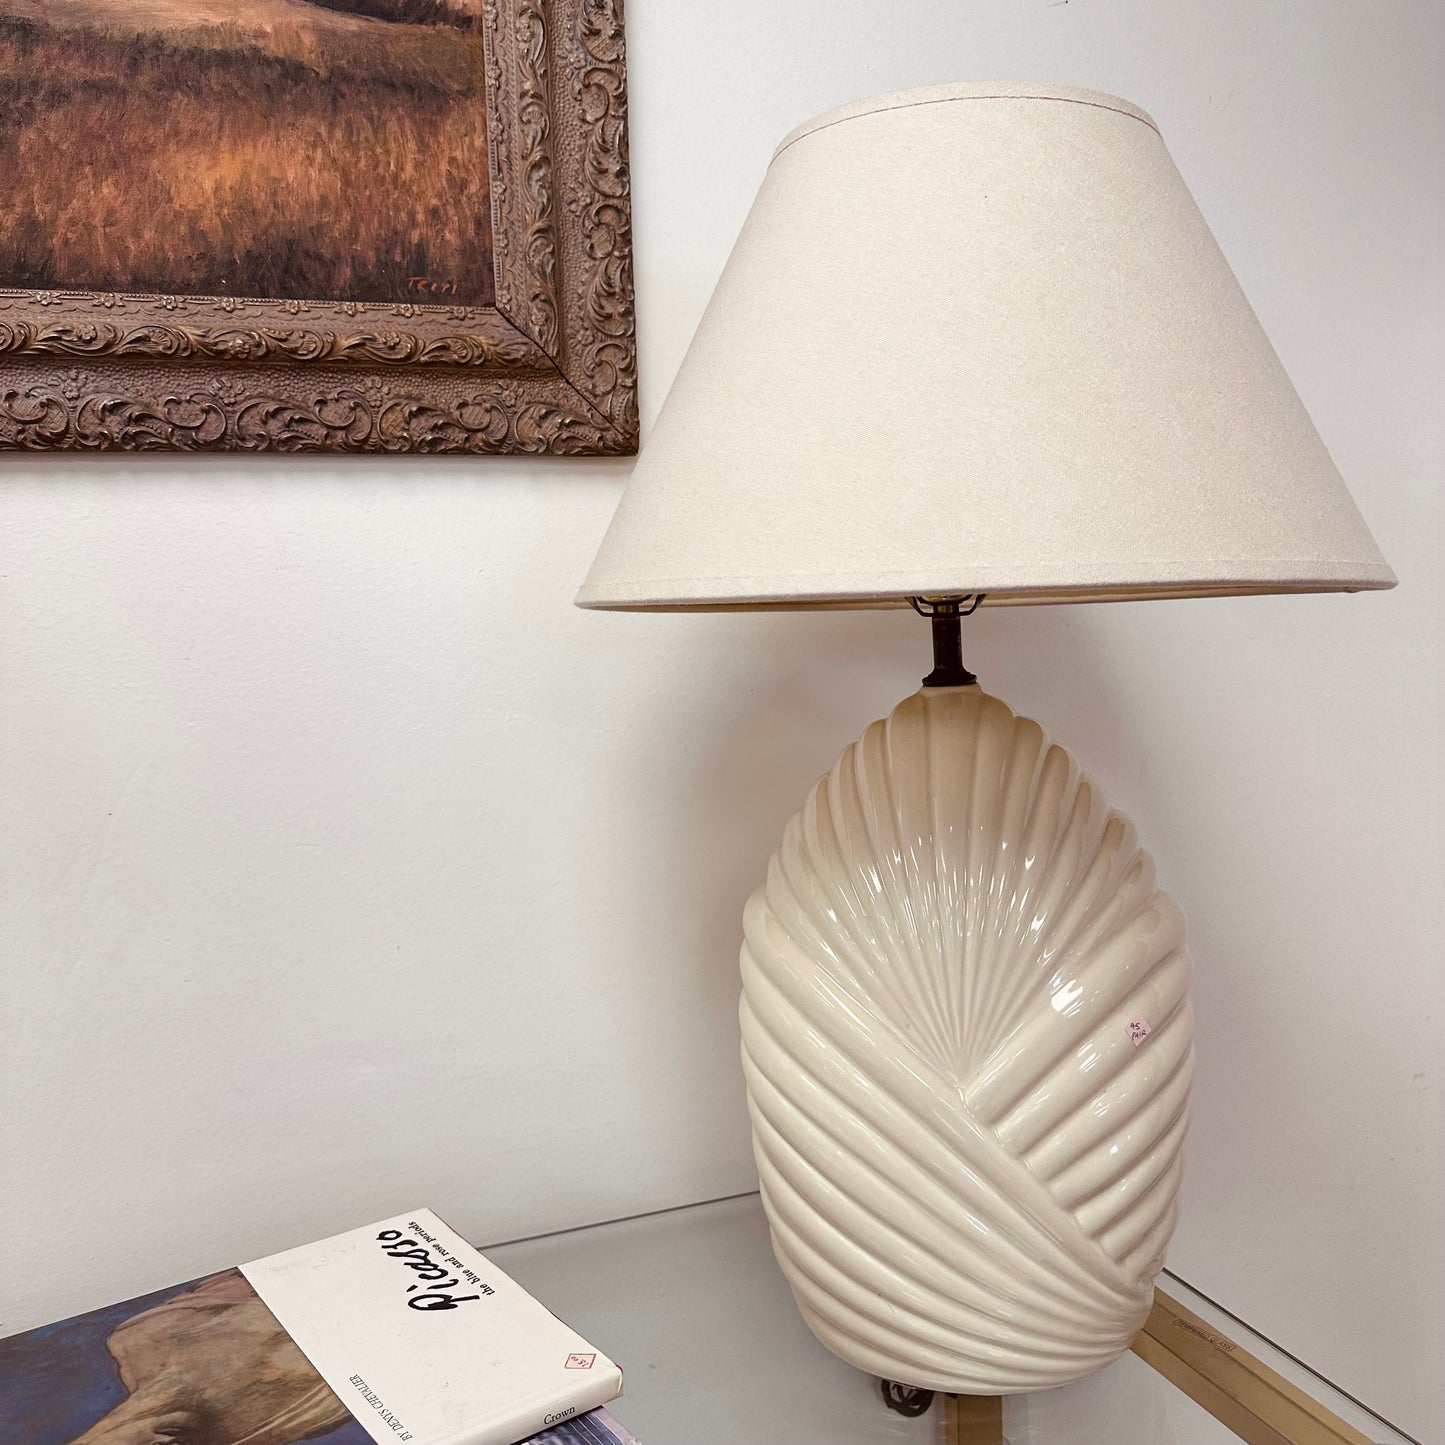 PAIR OF OFF WHITE RIBBED CERAMIC LAMPS